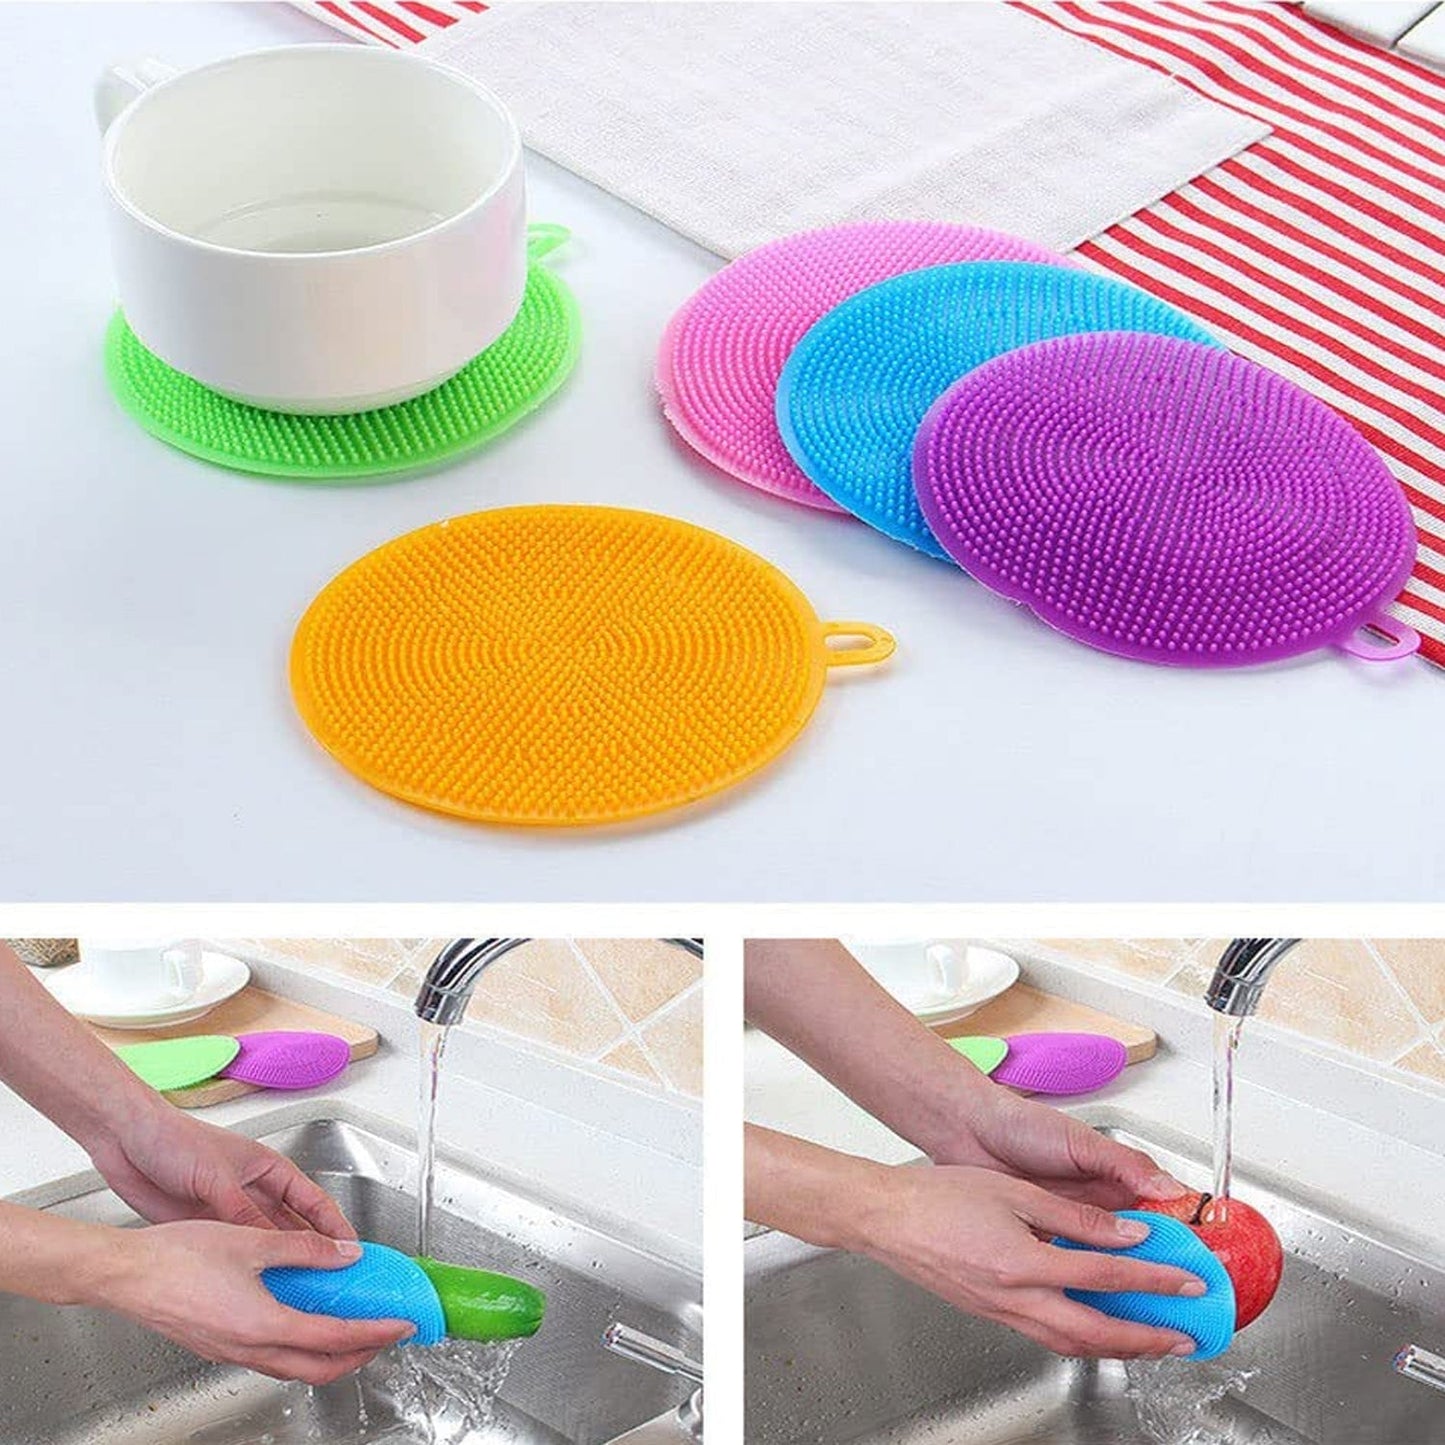 1344A Cleaning Supplies Sponges Silicone Scrubber for Kitchen Non Stick Dishwashing & Baby Care Sponge Brush Household Health Tool( Pack of 5pc). JK Trends